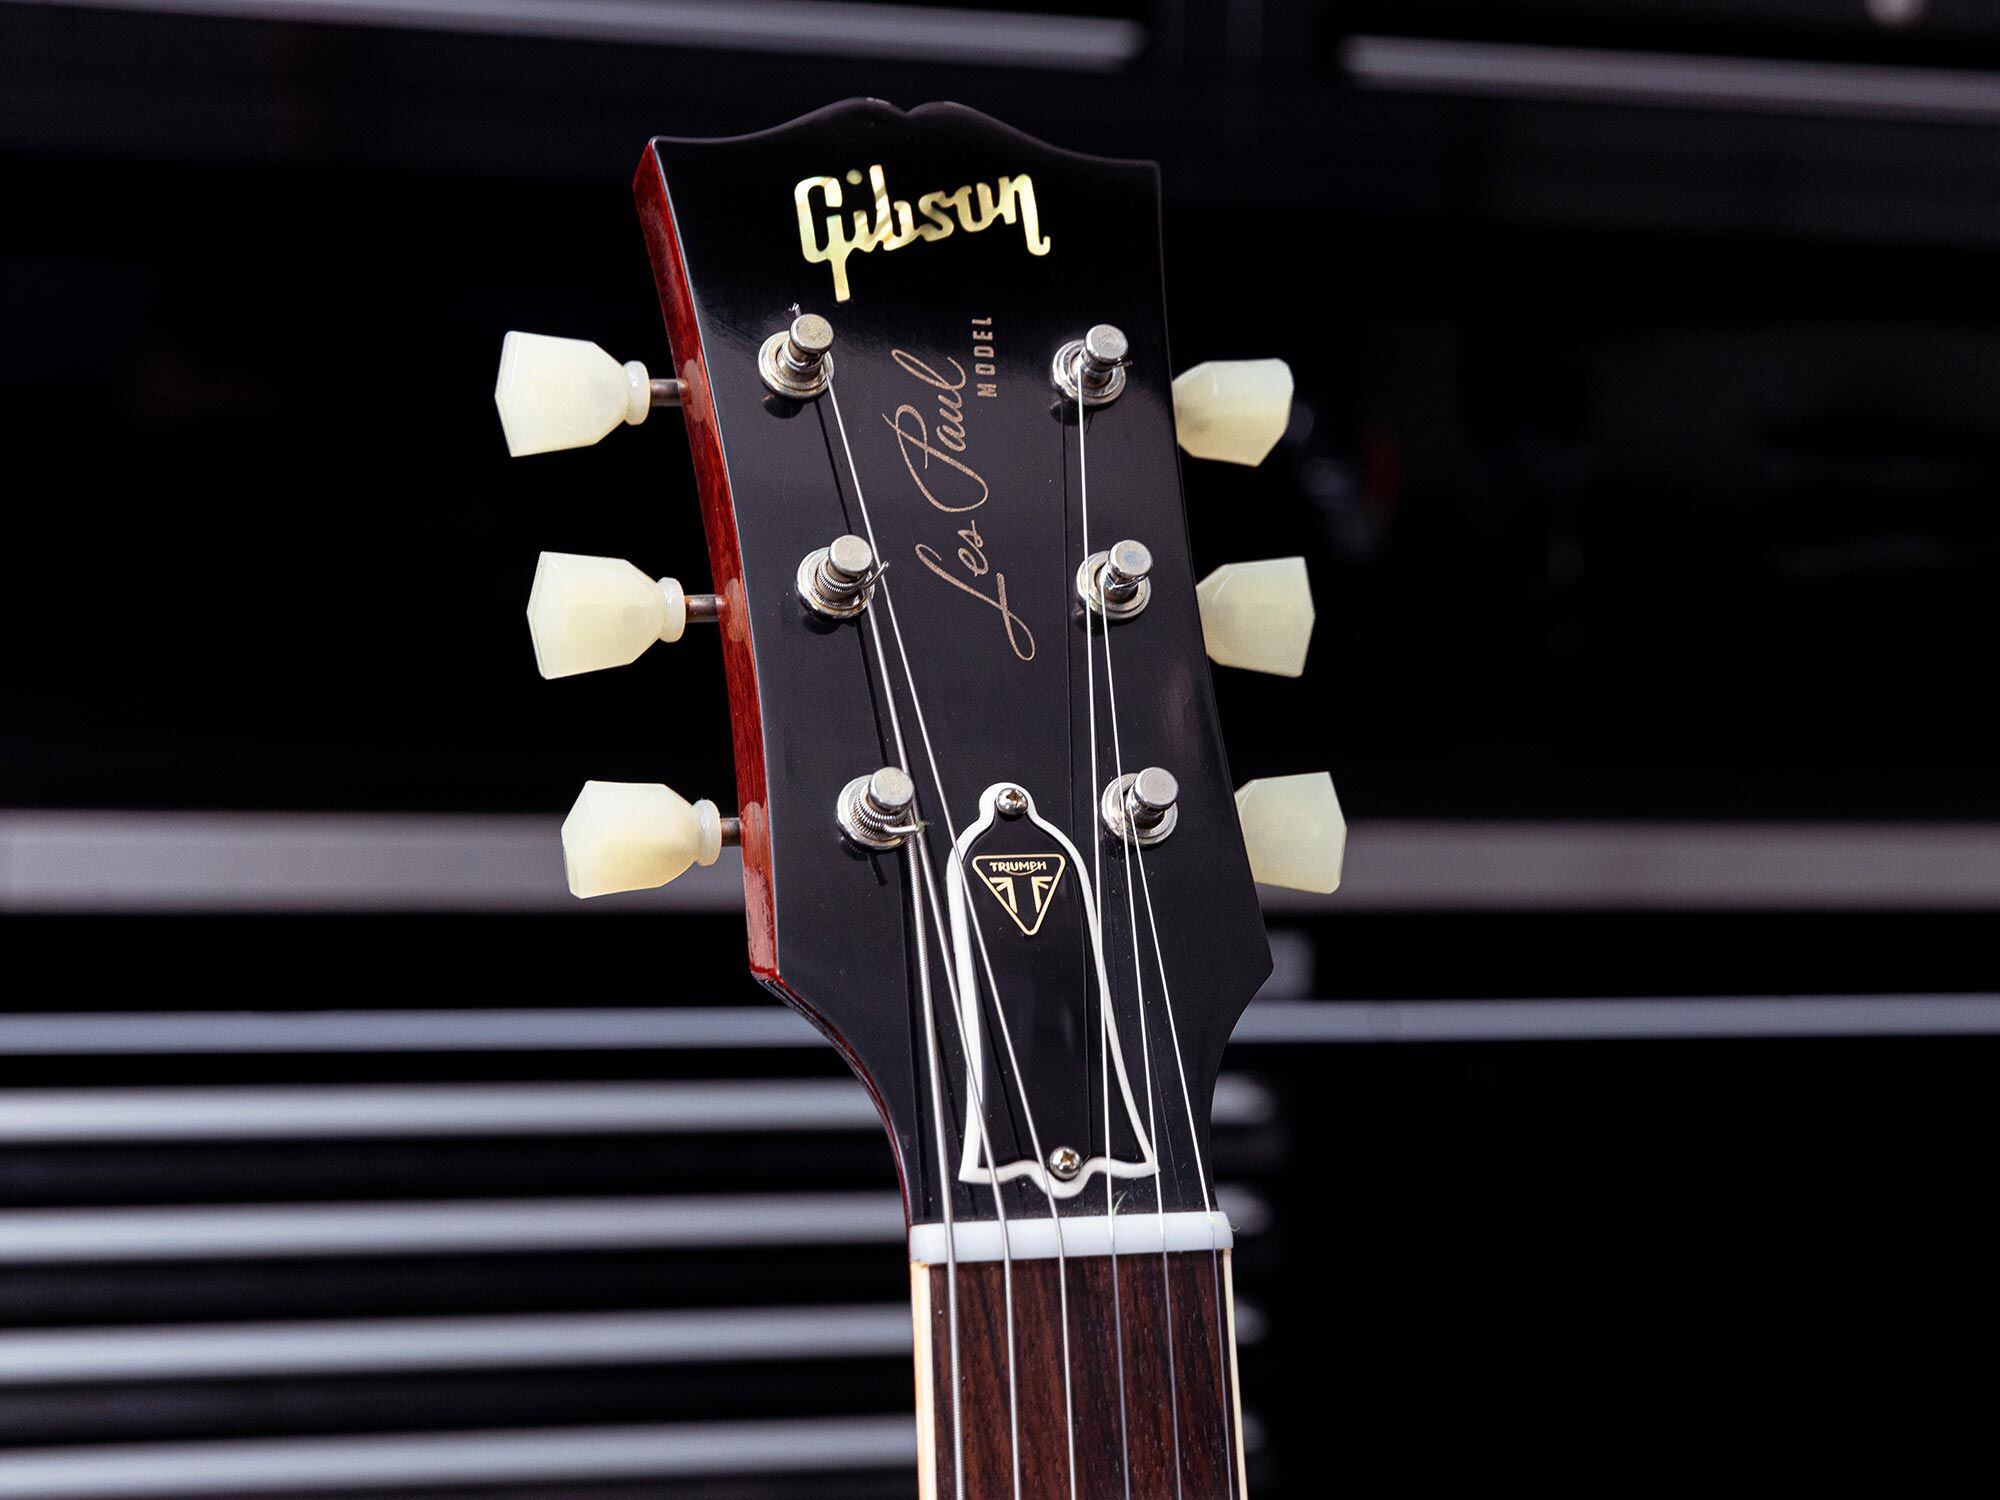 It’s not often you see Triumph badging on a Gibson Les Paul.